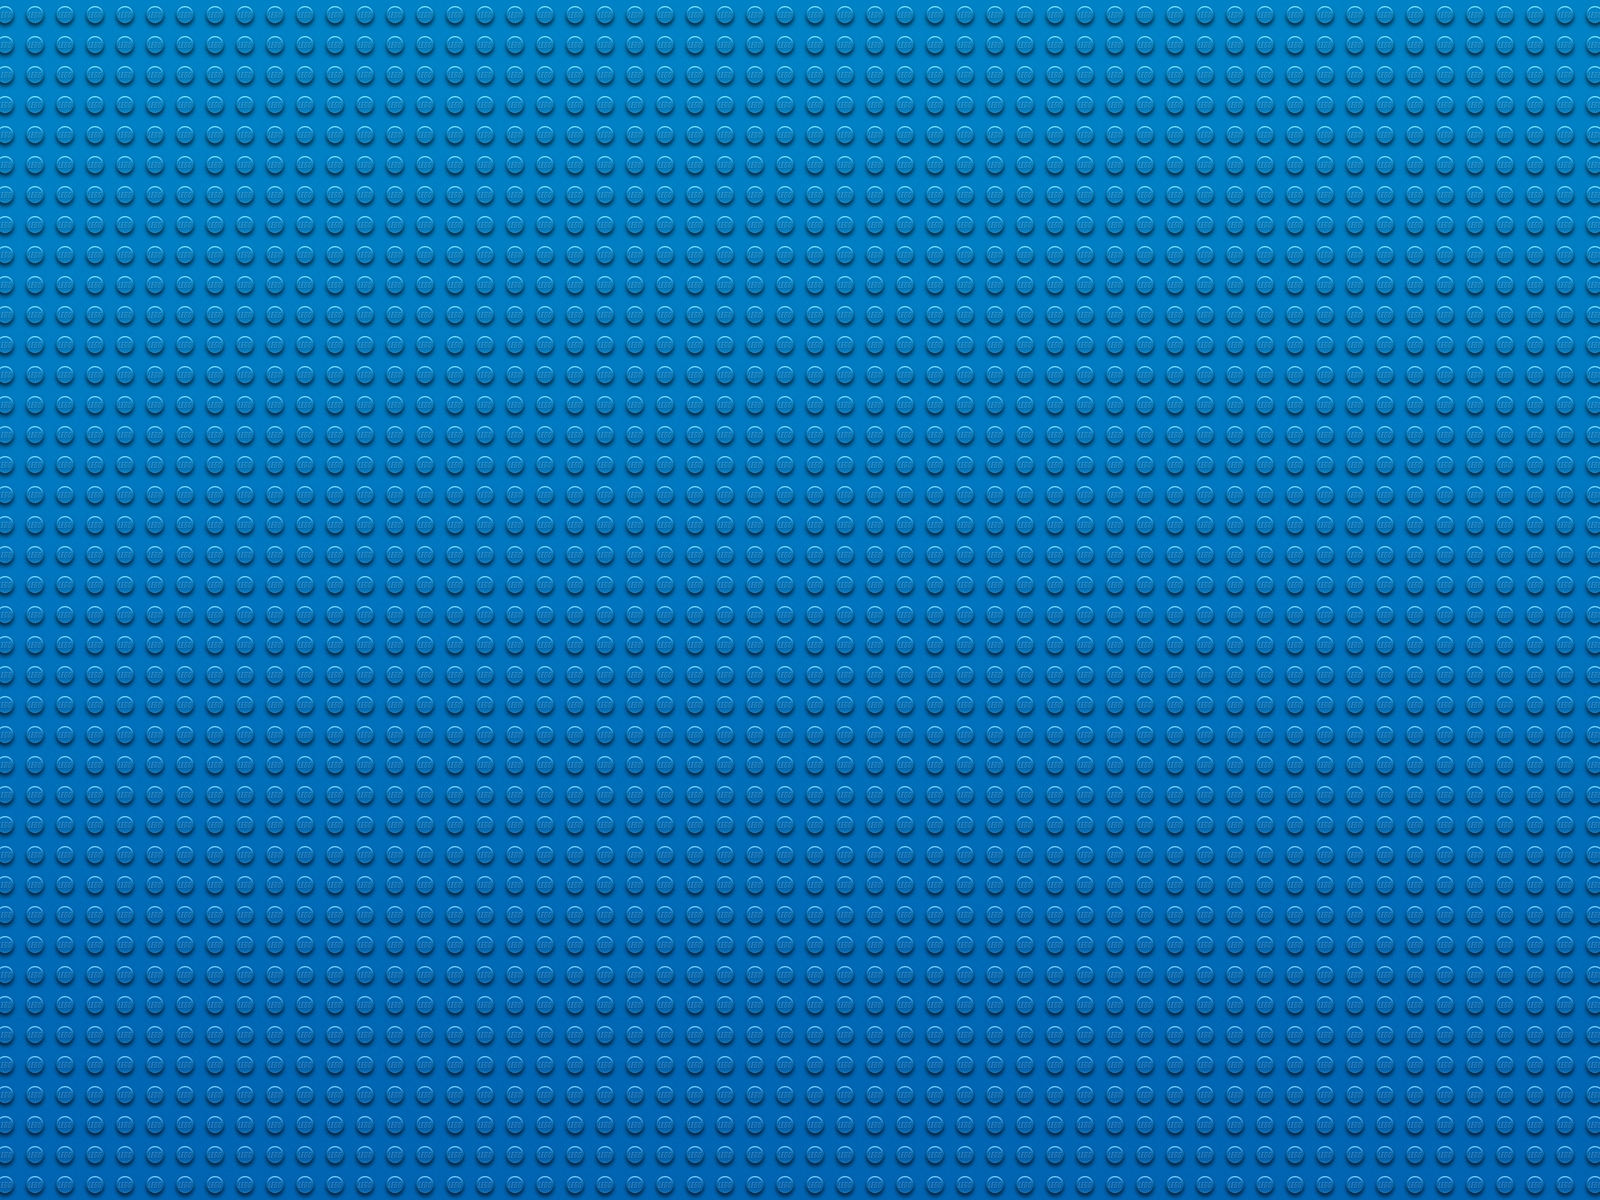 Lego Texture for 1600 x 1200 resolution